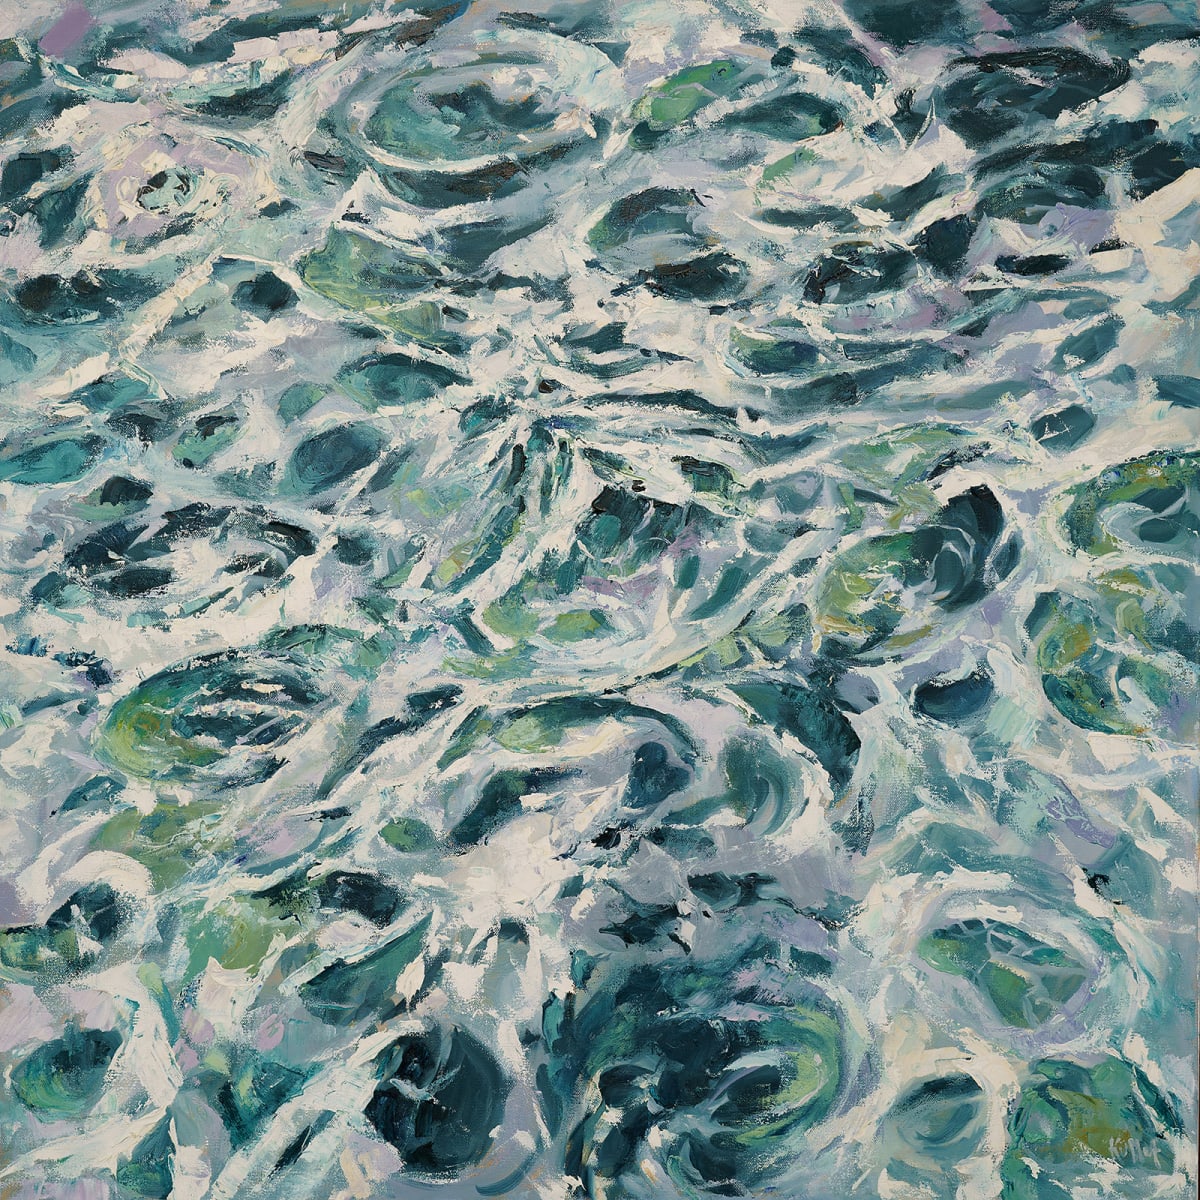 Sea Swirl by Anne Kullaf  Image: Get lost in a maze of blues and greens and the Pacific Ocean swirls around you. This painting evokes calm and a sense of motion as you explore the nuances of color and form.